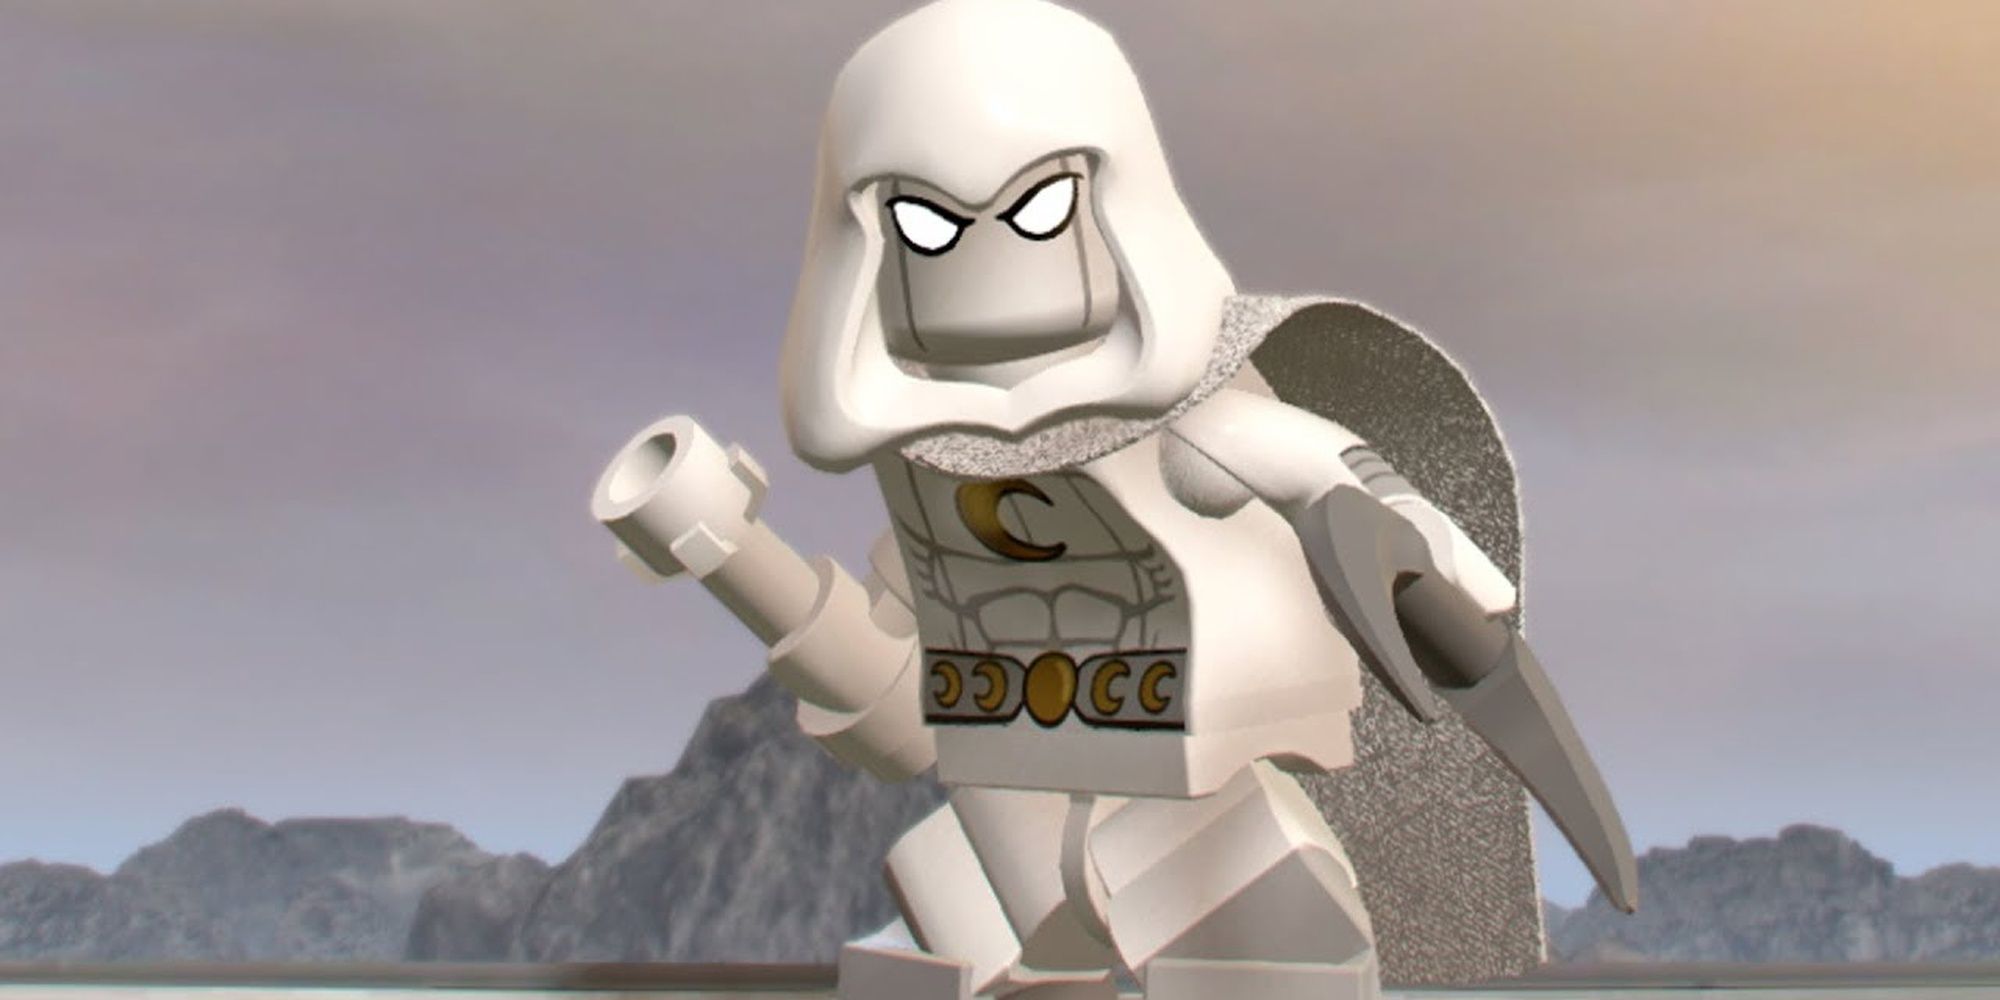 Moon Knight featured in Lego Marvel Super Heroes 2